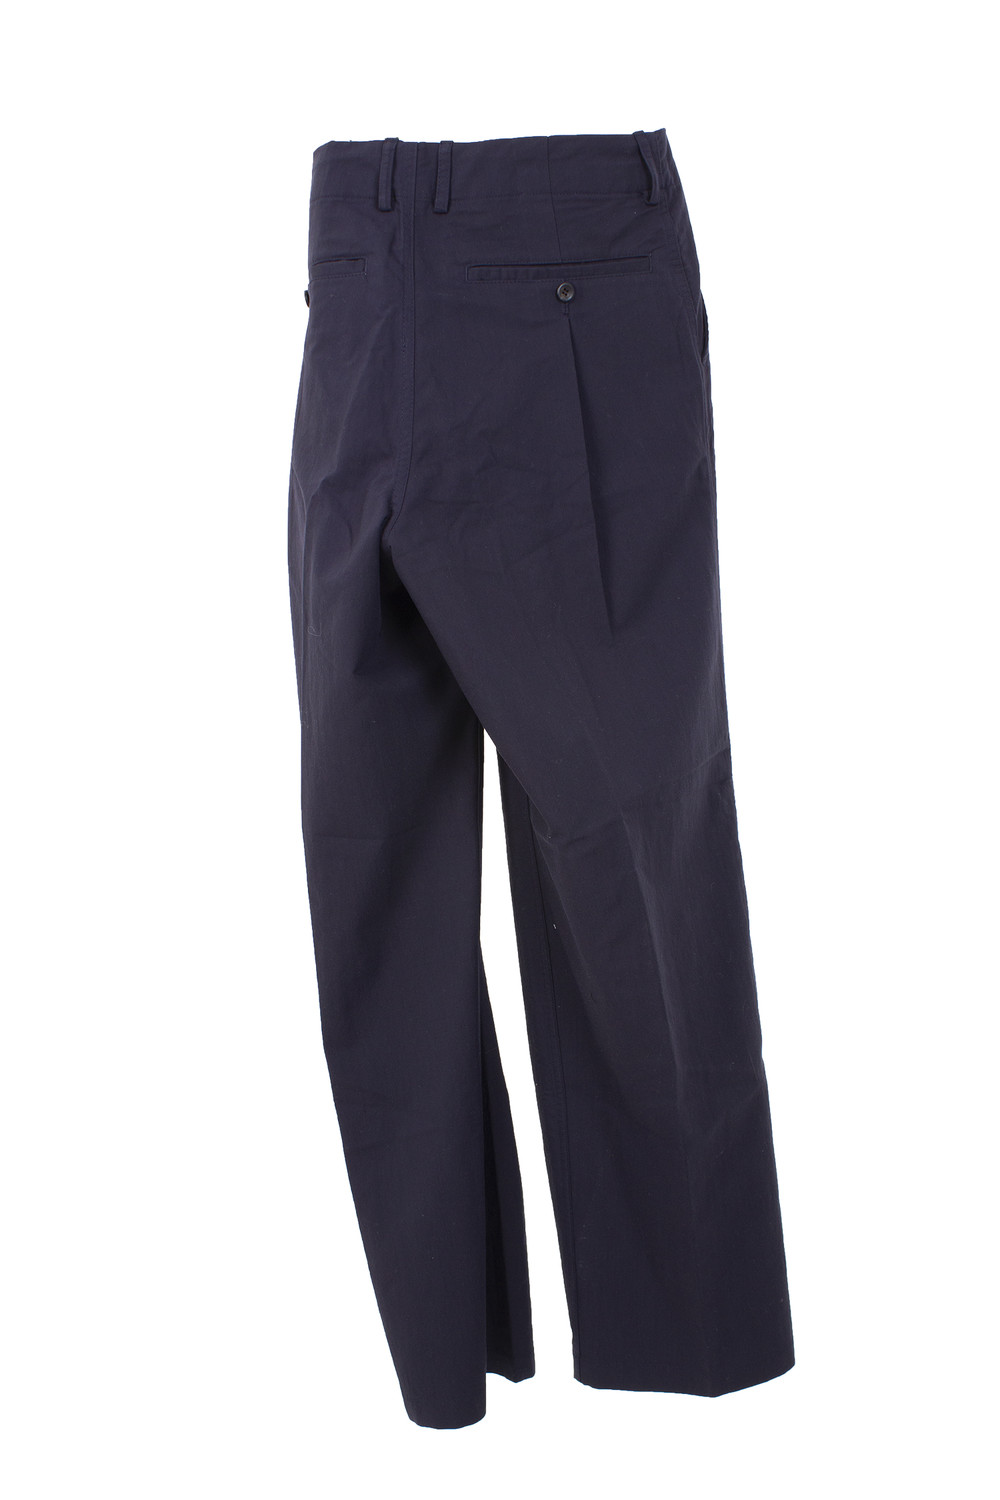 NAVY TUCKED TROUSERS